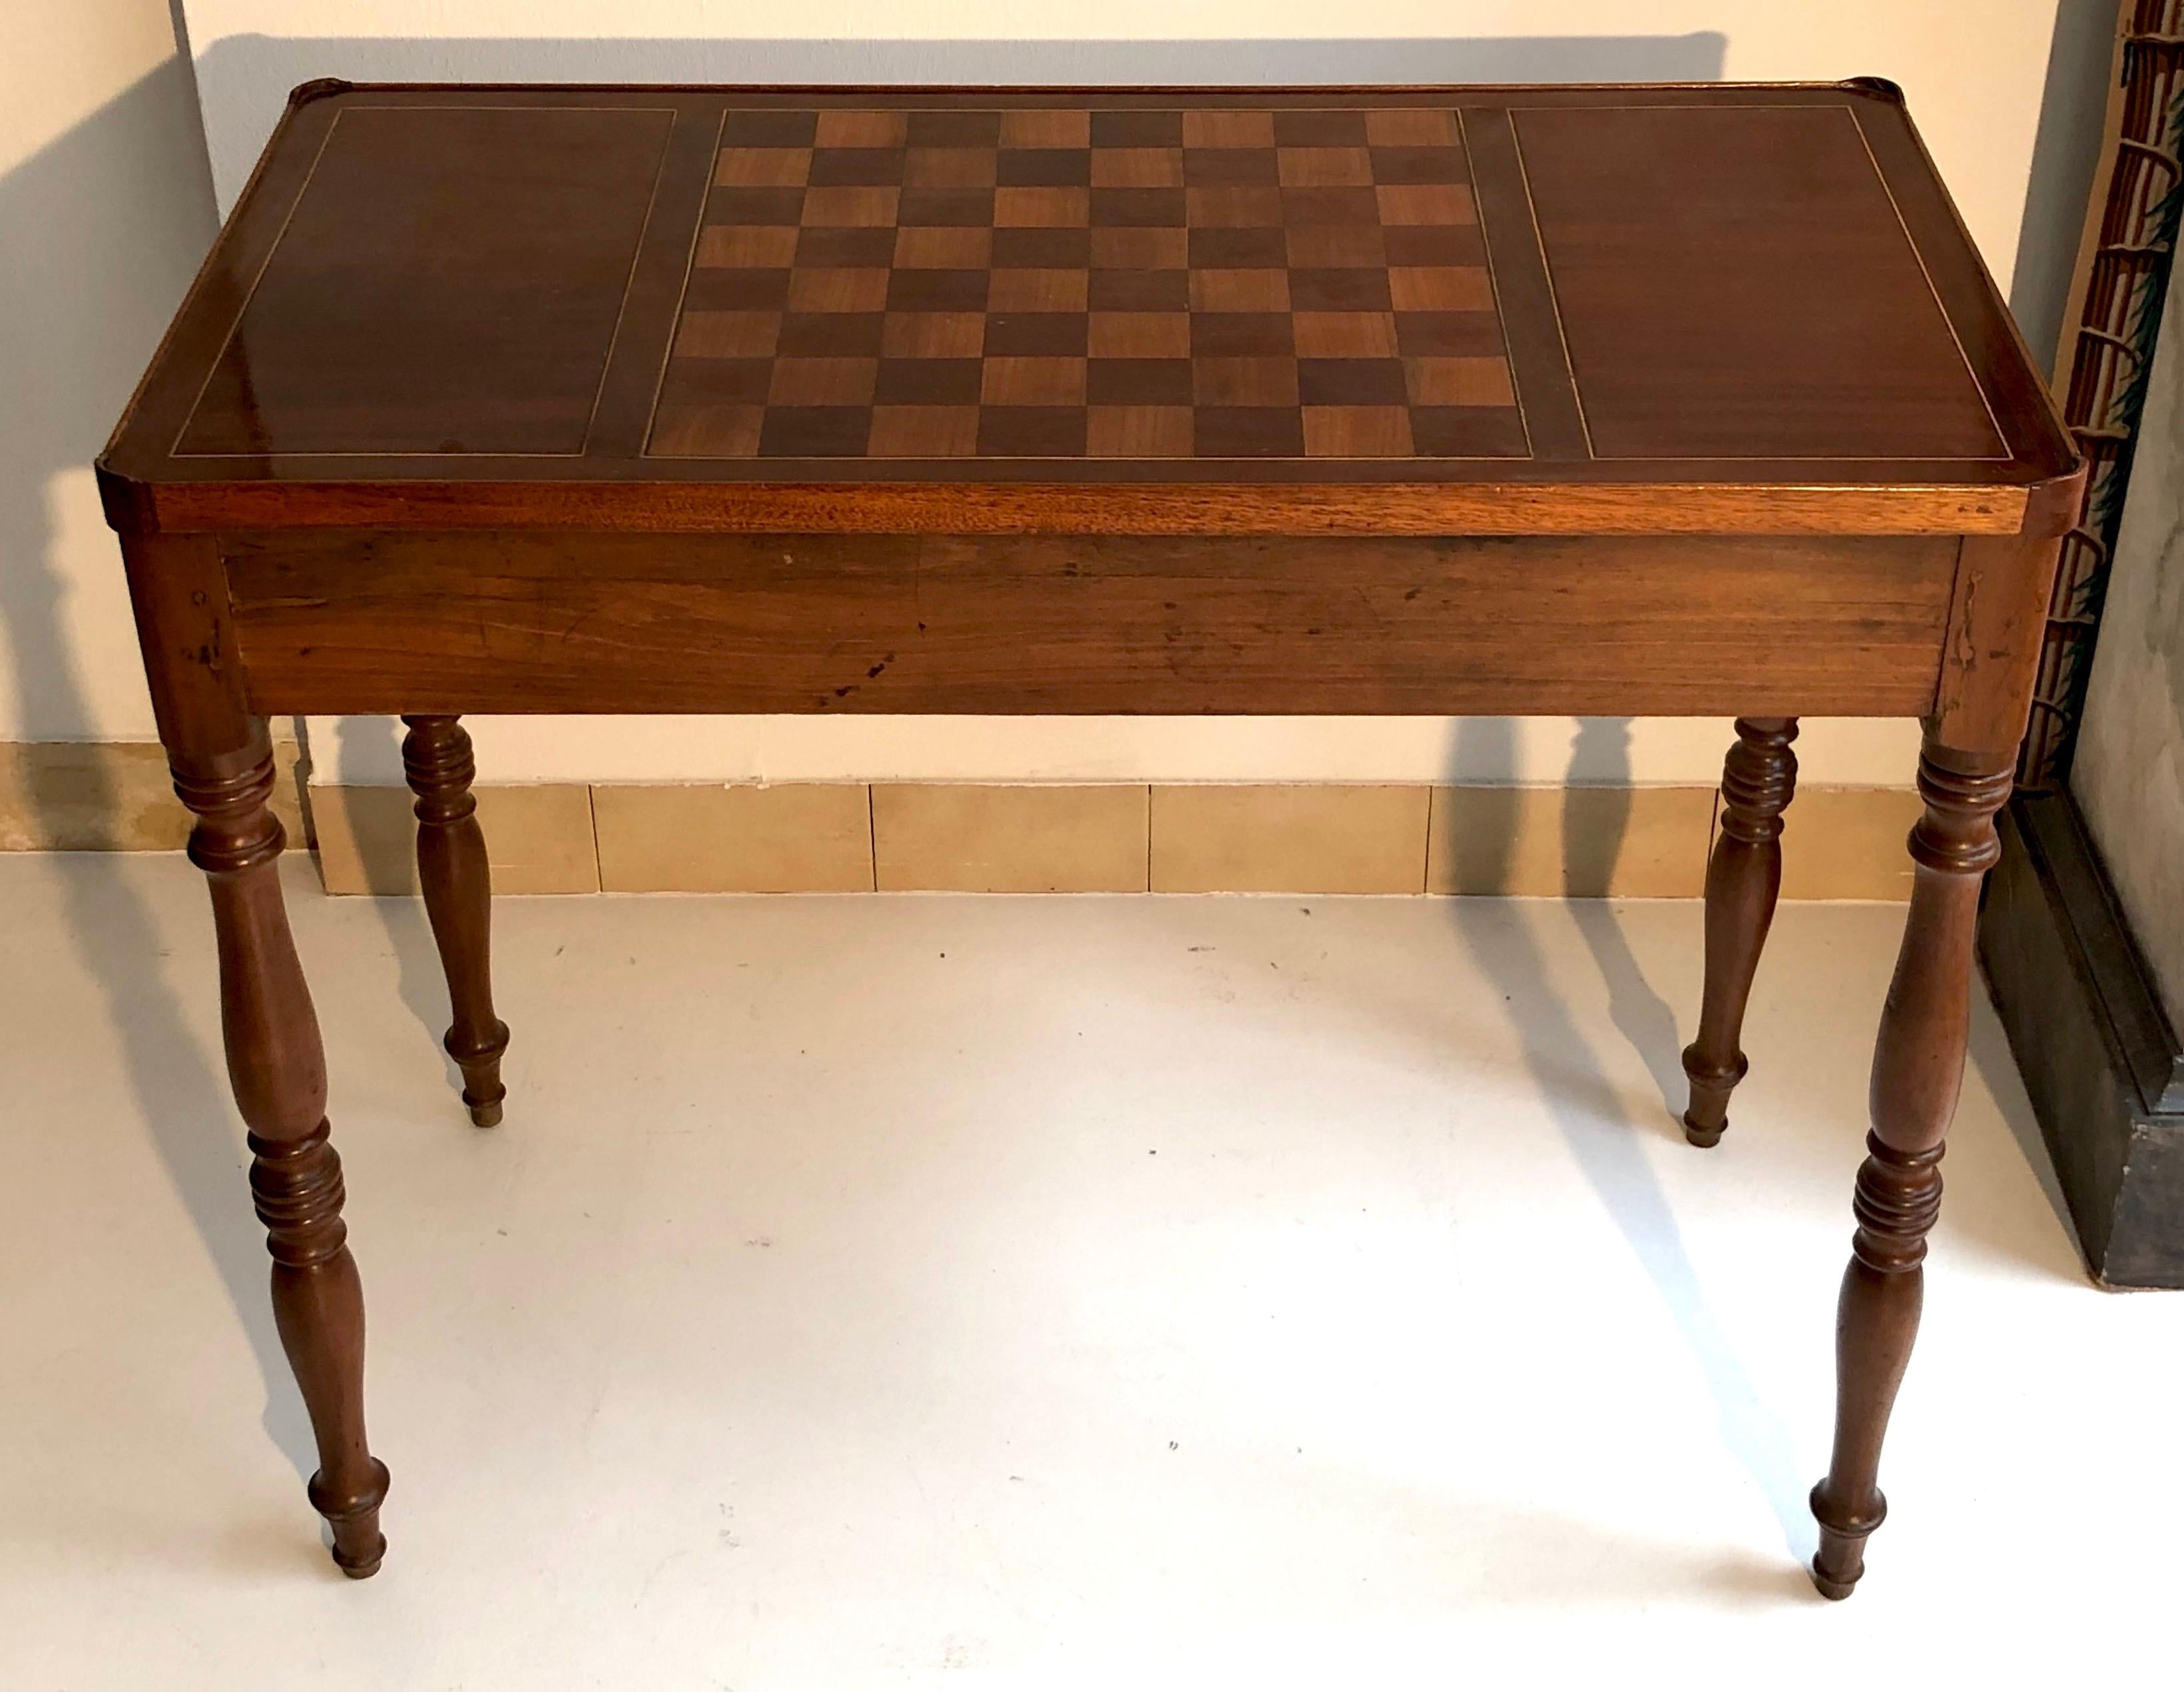 This game table is convertible into a chessboard, a tric trac board for backgammon, checkers and it also doubles as a writing desk. The writing side of the table is covered with gold embossed light brown cow leather. This charming piece of furniture